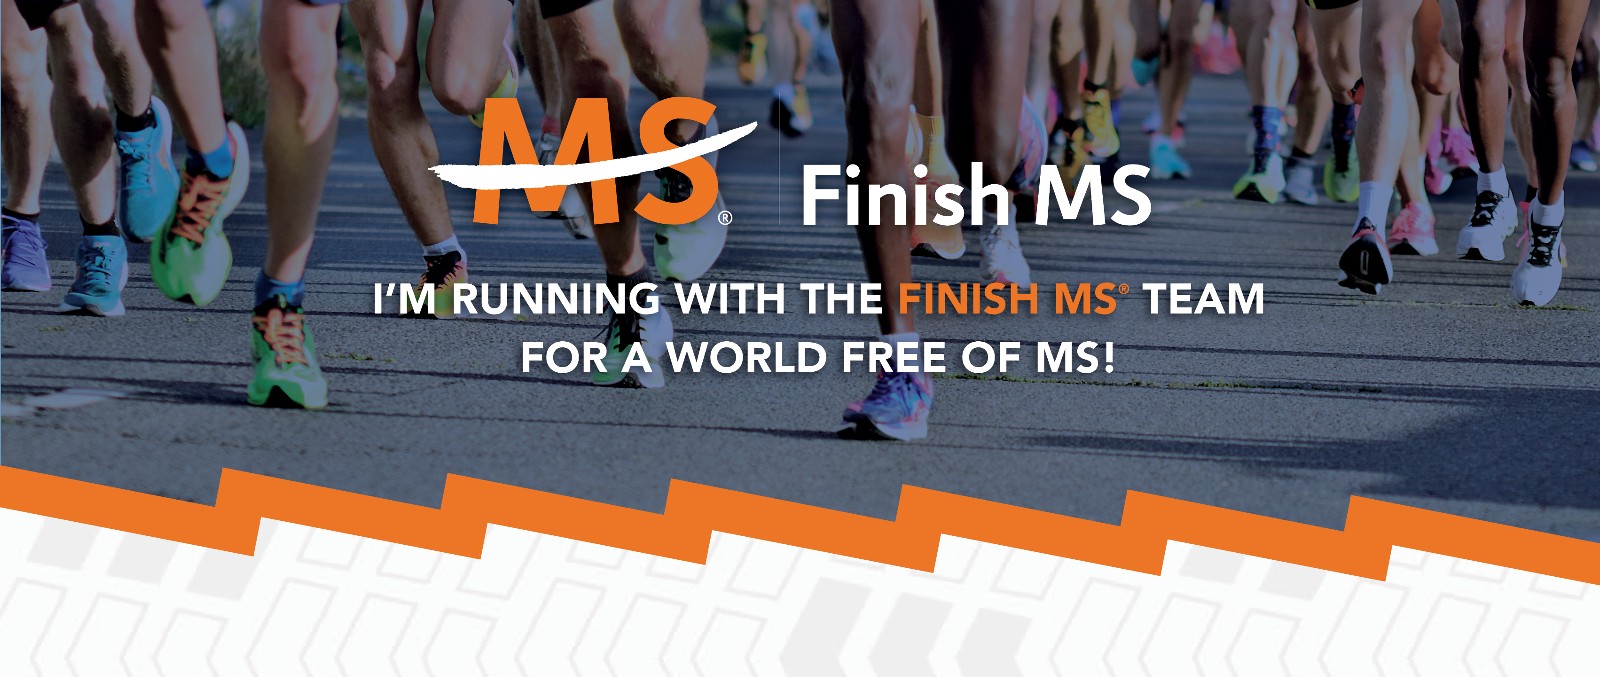 Finish MS - I'm Running With the Finish MS Team